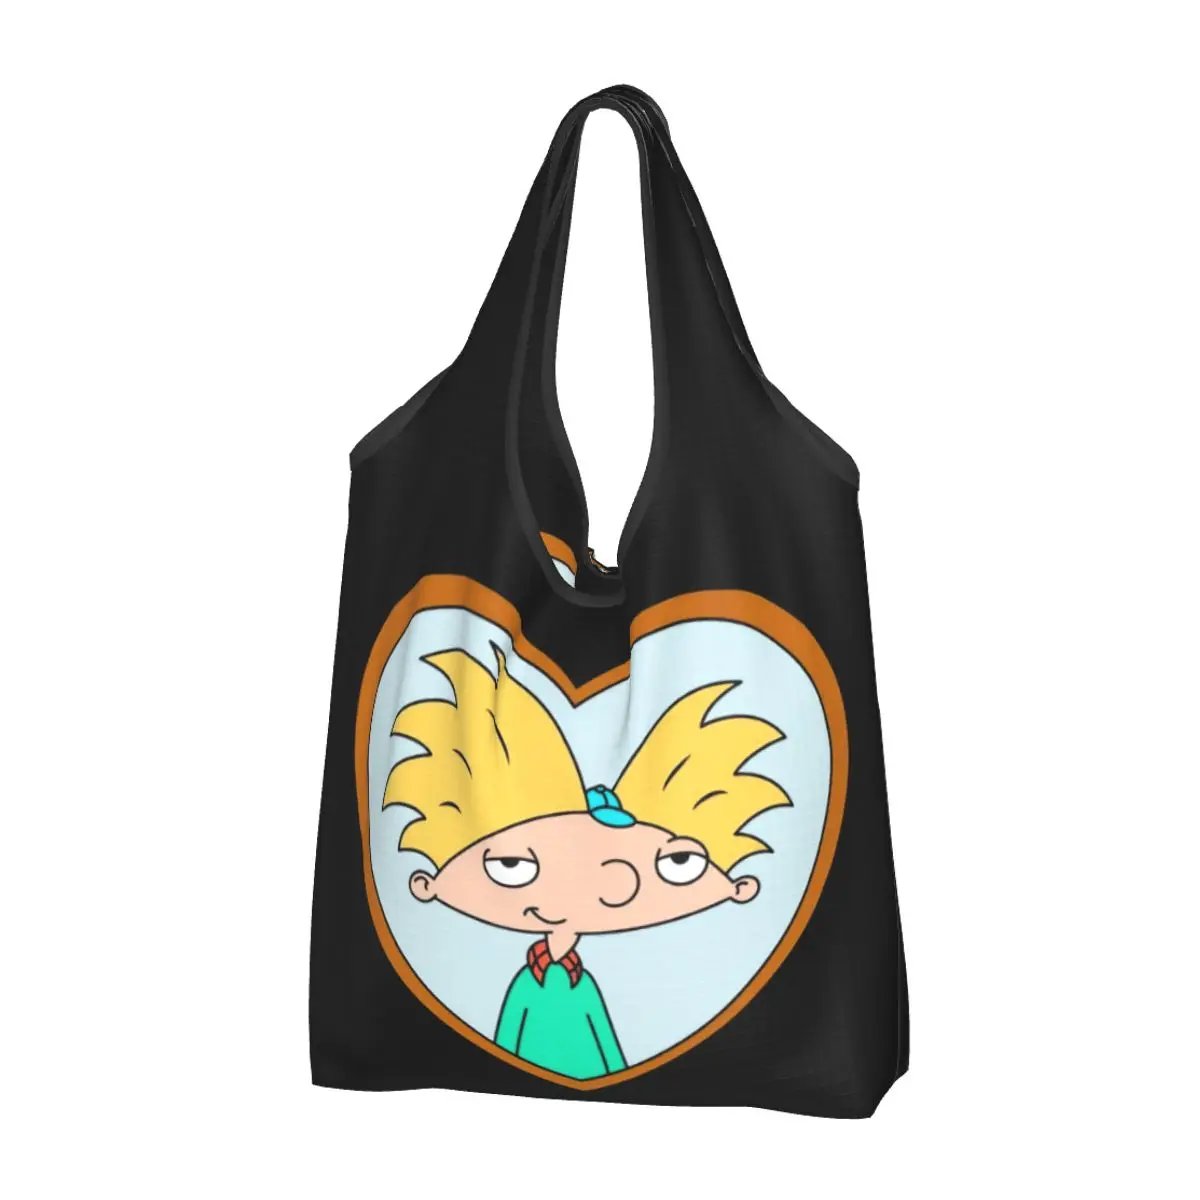 

Hey Arnold Cartoon Reusable Shopping Grocery Bags Foldable 50LB Weight Capacity Heart Arnold Eco Bag Eco-Friendly Ripstop